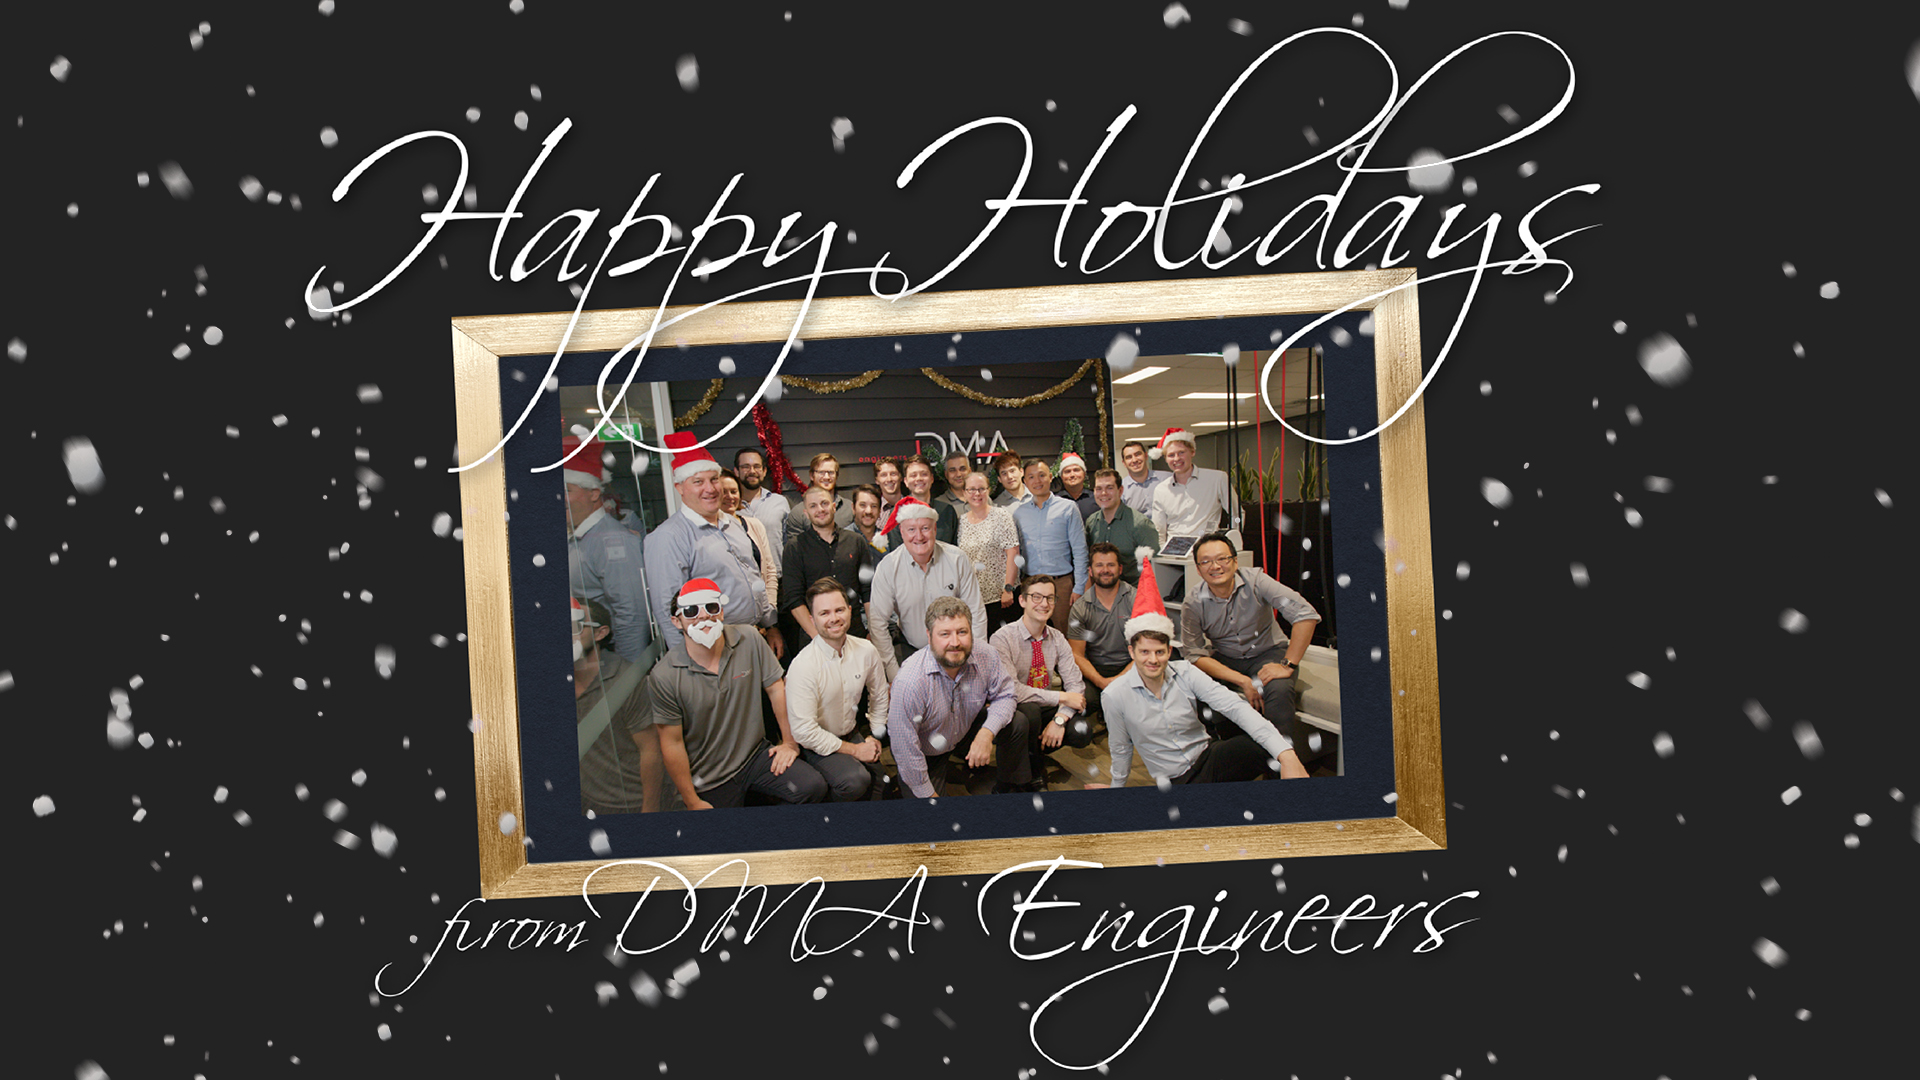 Merry Christmas from DMA Engineers